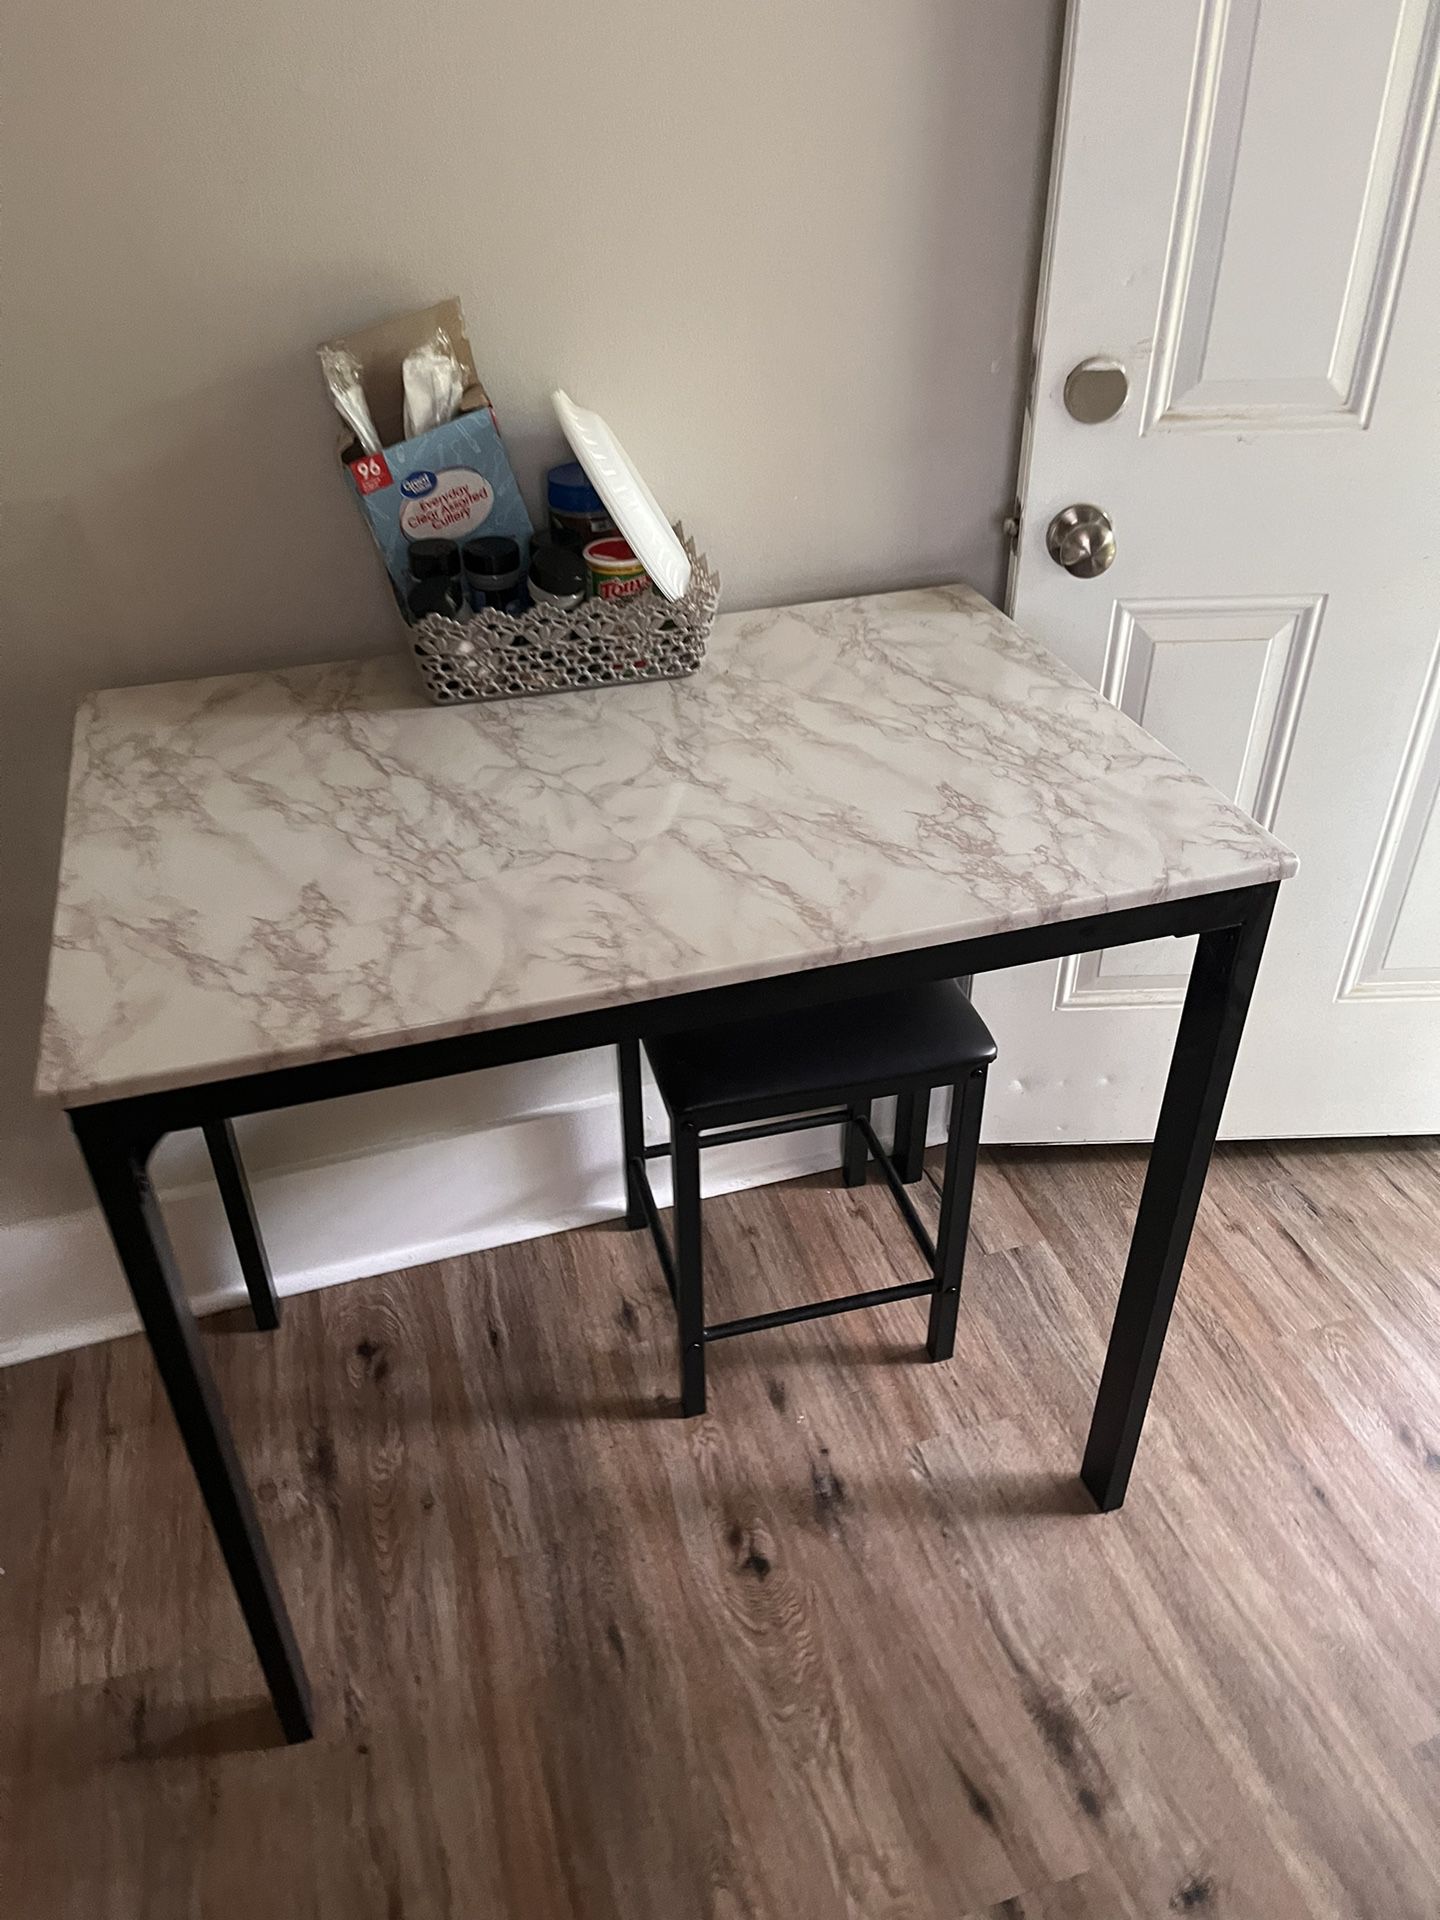 Small kitchen Table